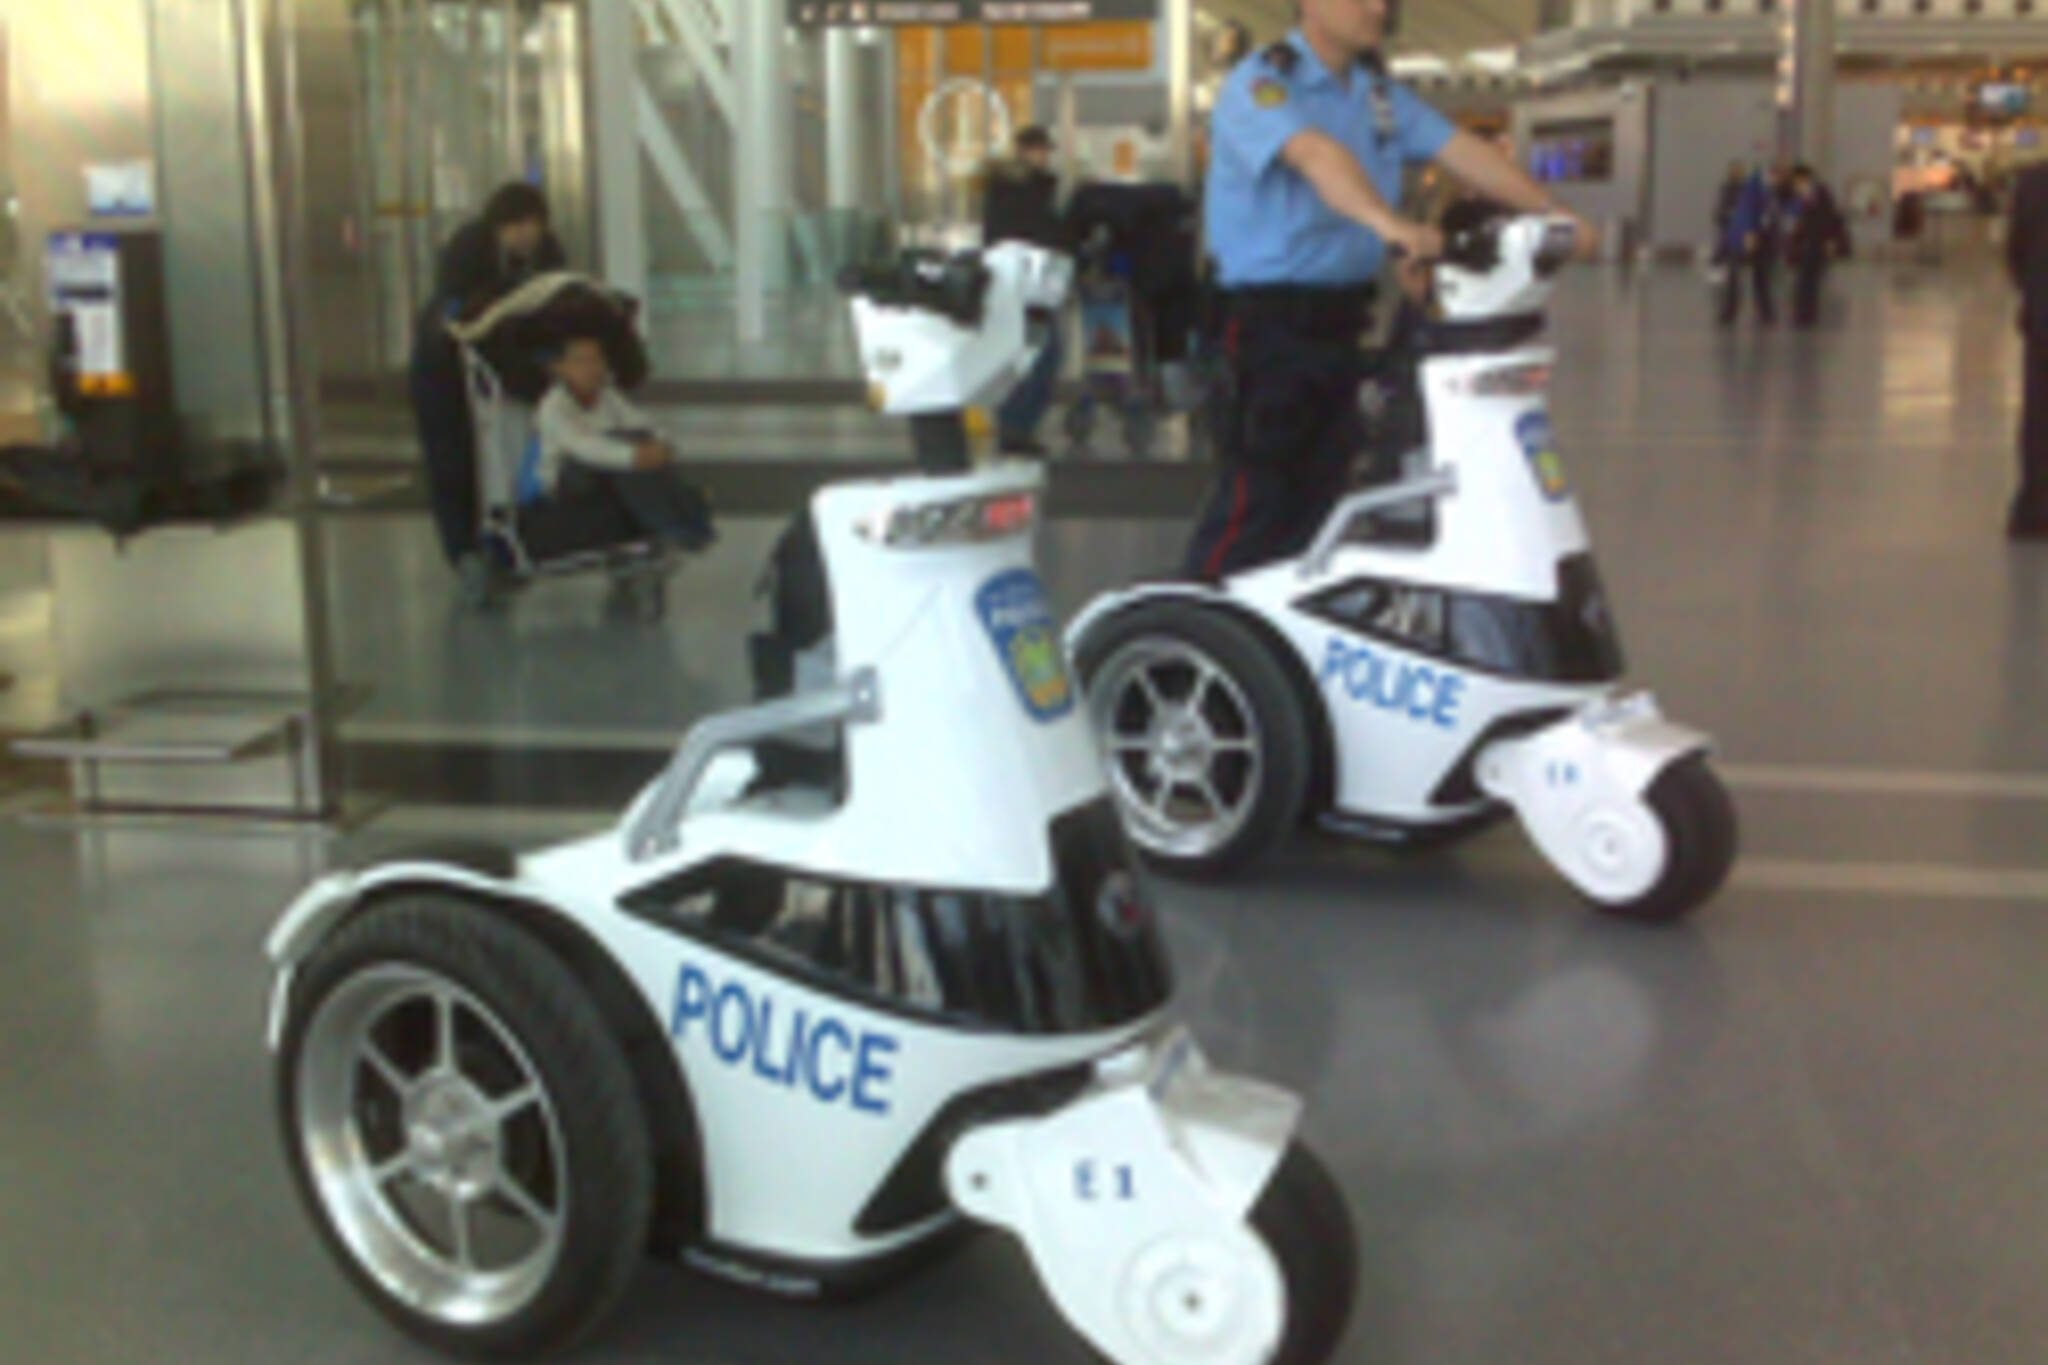 Police T3s at Pearson